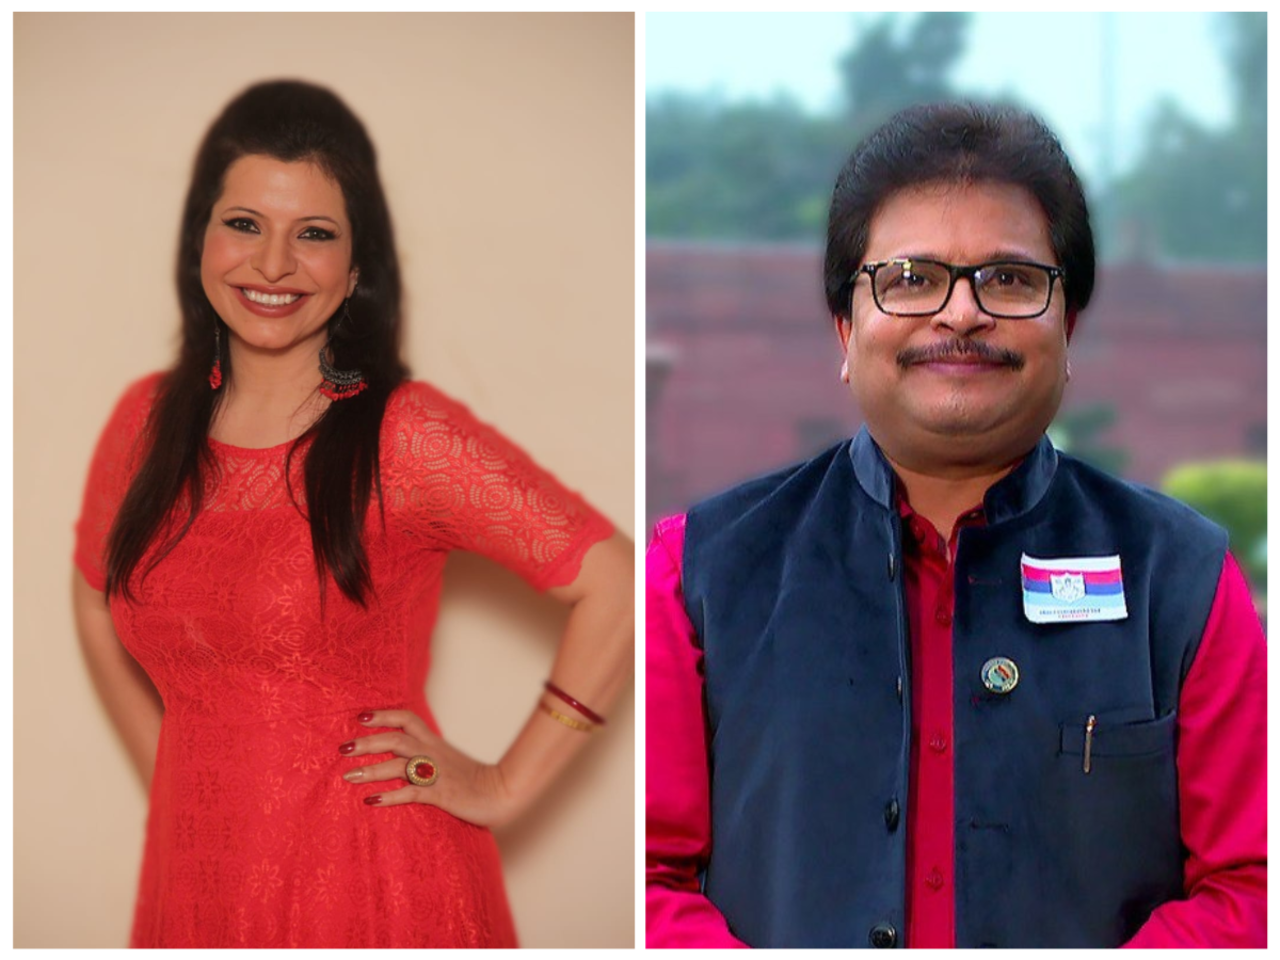 Exclusive - Jennifer Mistry Bansiwal aka Mrs Roshan Sodhi quits Taarak  Mehta Ka Ooltah Chashmah after 15 years; accuses producer Asit Kumarr Modi  of sexual harassment - Times of India